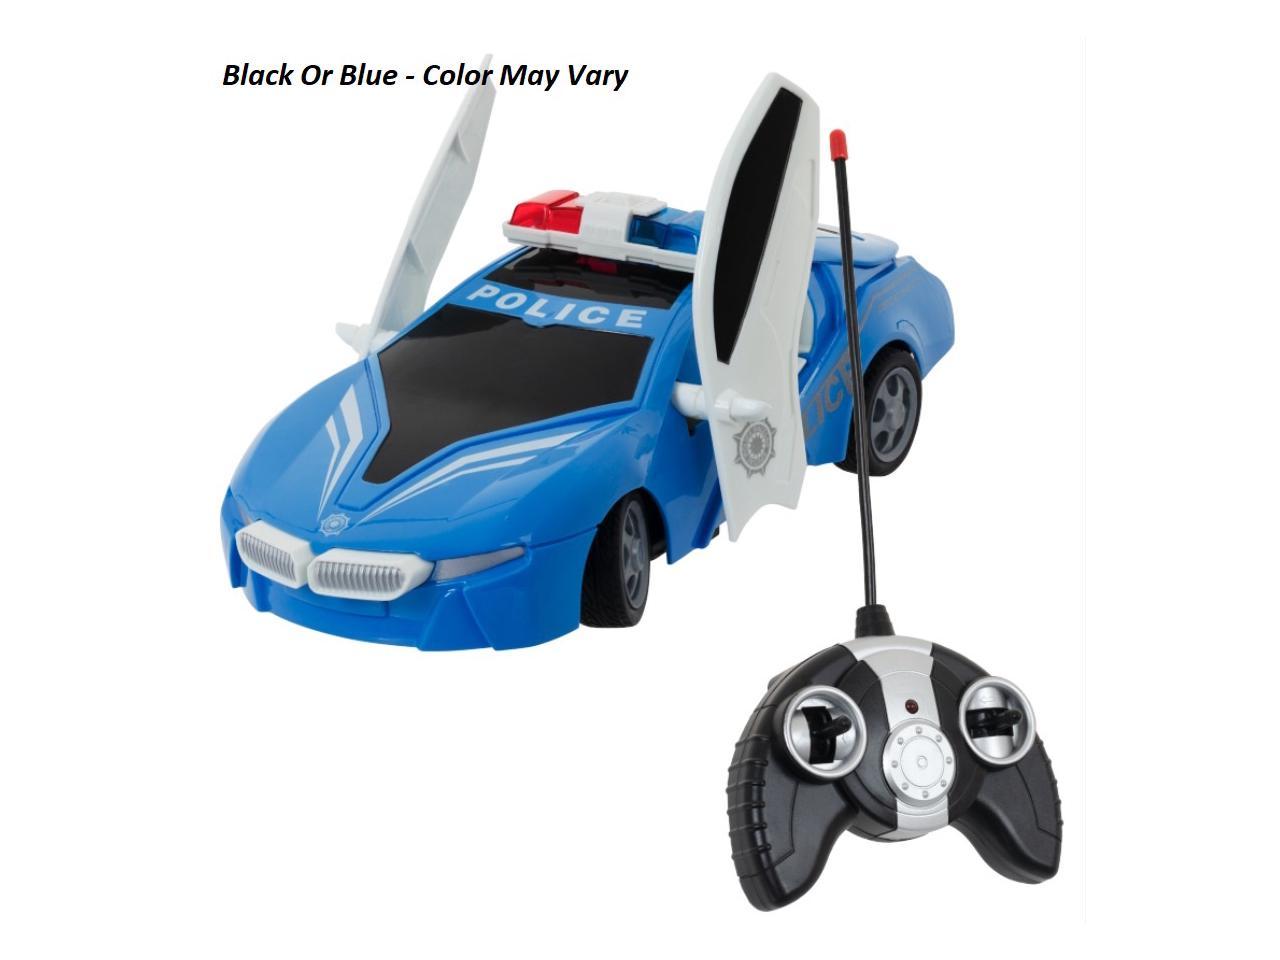 toy cars with doors that open up